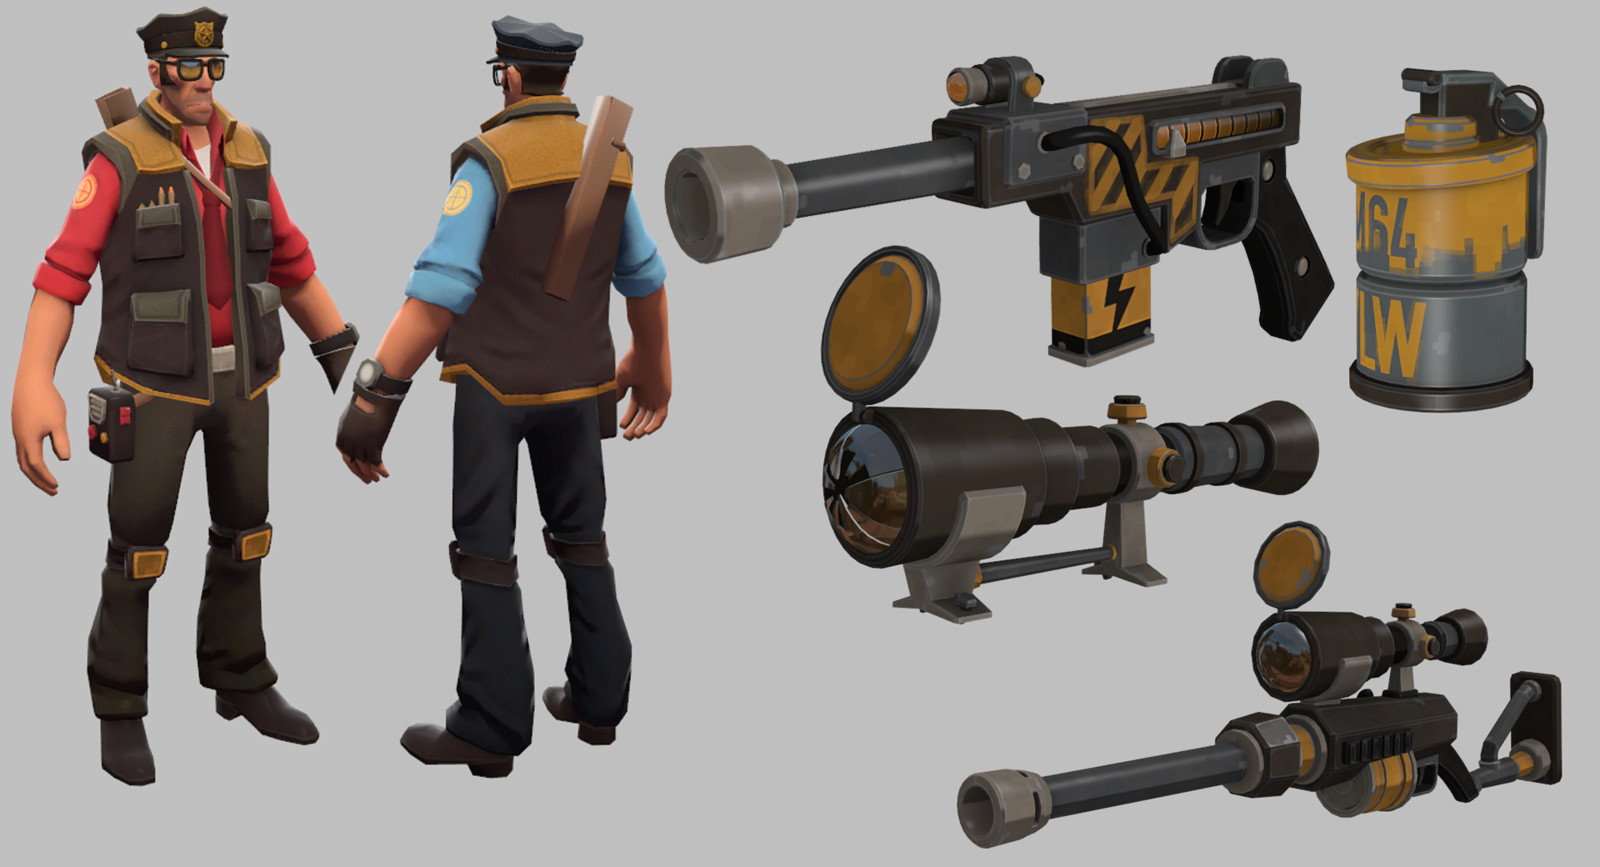 Police themed Sniper set, 3 cosmetics and 4 weapons.